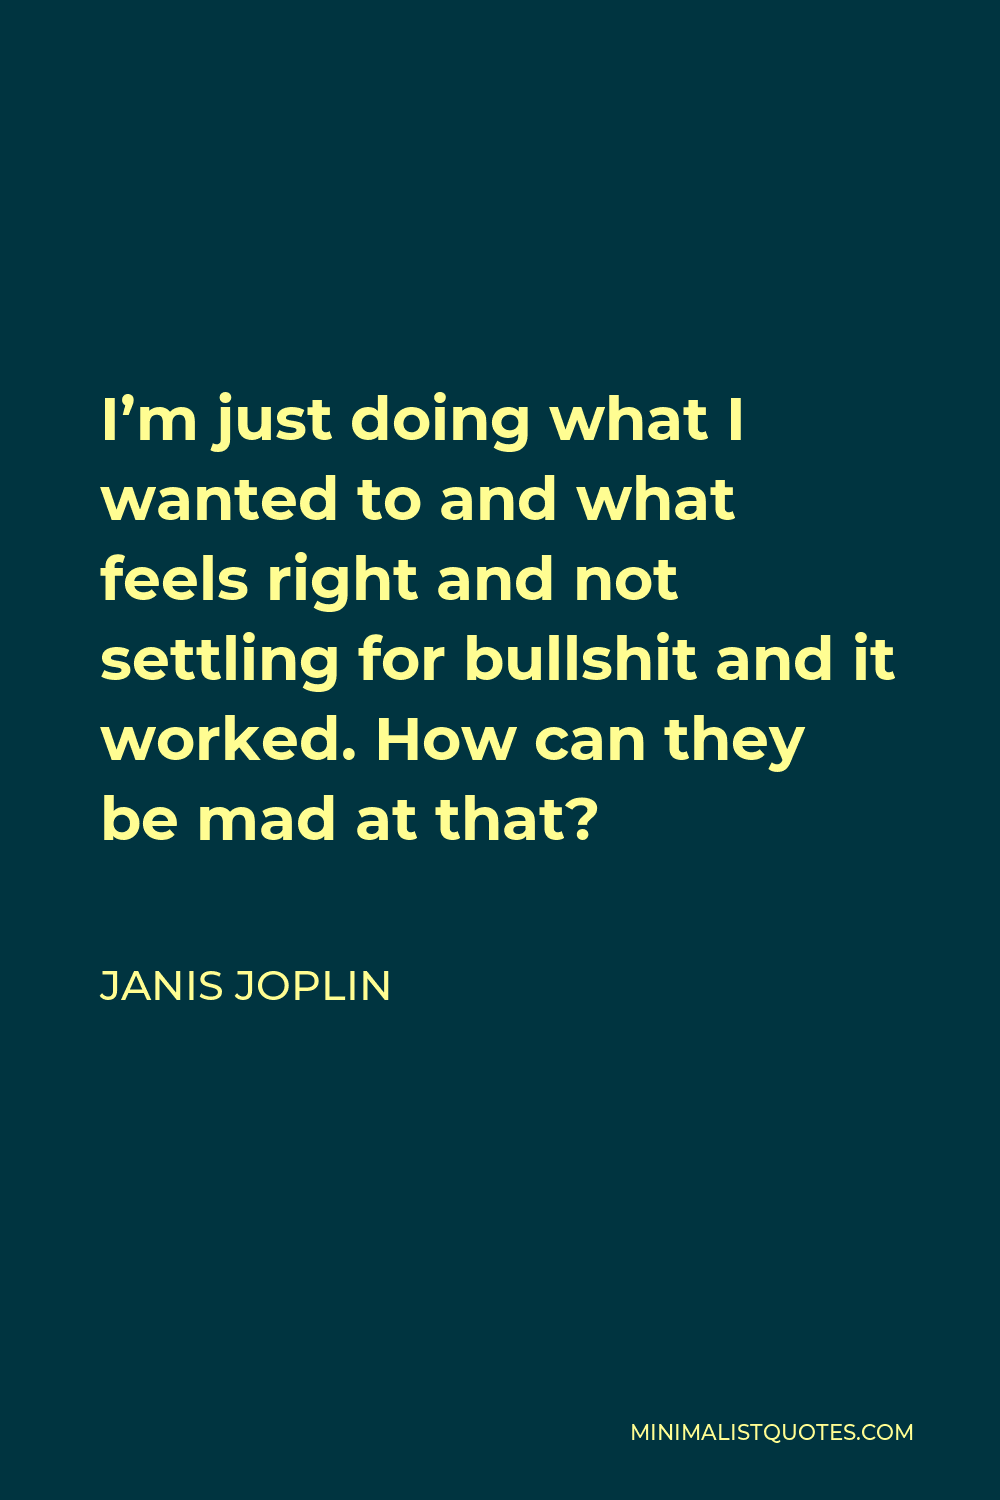 Janis Joplin Quote - I’m just doing what I wanted to and what feels right and not settling for bullshit and it worked. How can they be mad at that?